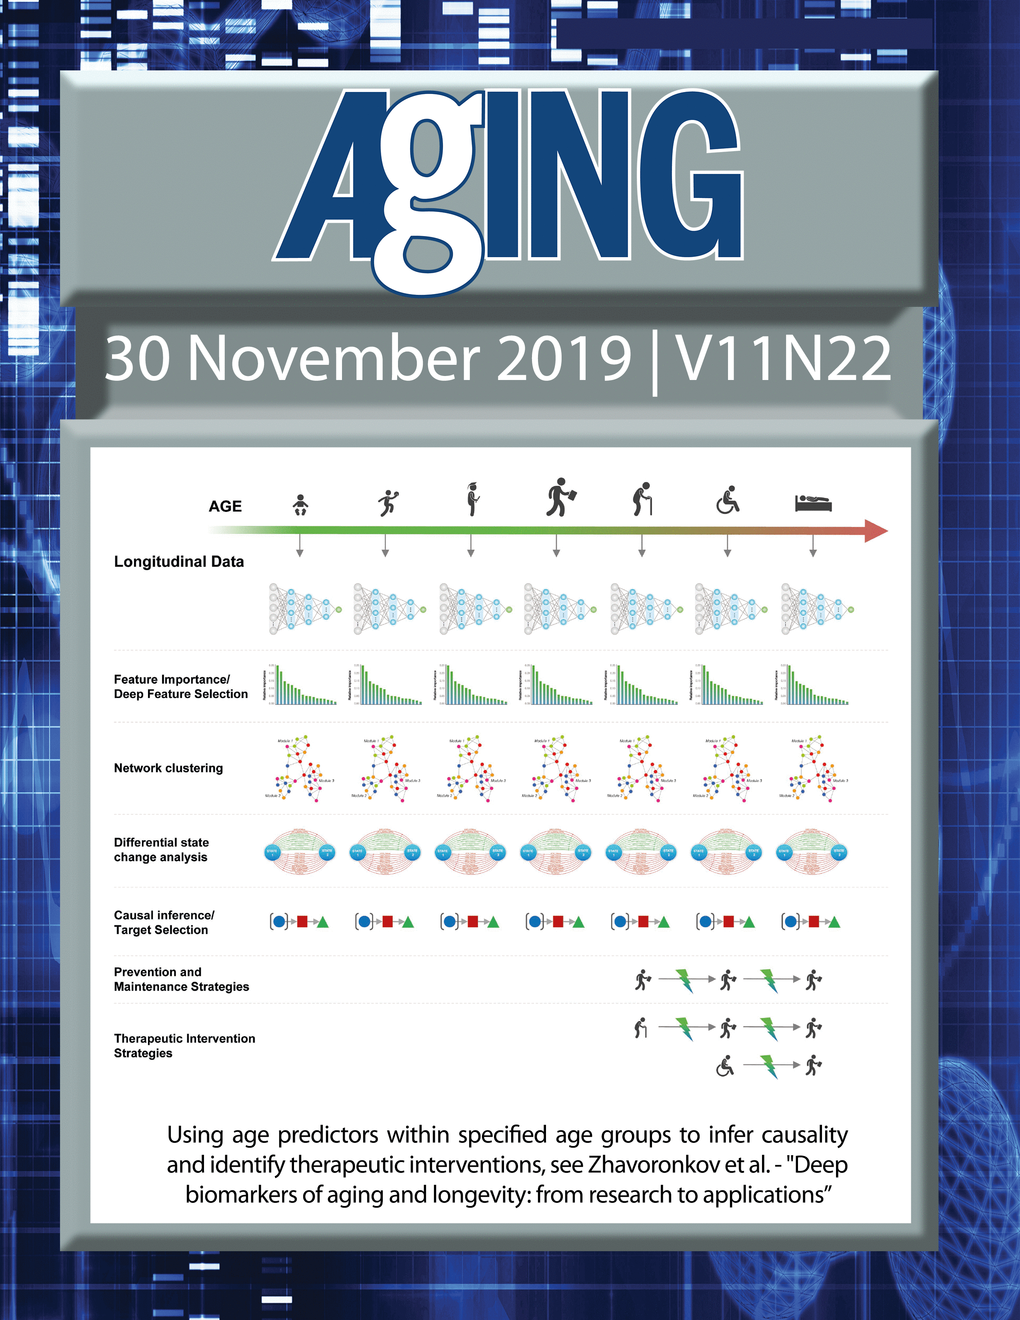 The cover features Figure 4 "Using age predictors within specified age groups to infer causality and identify therapeutic interventions" from Zhavoronkov et al.